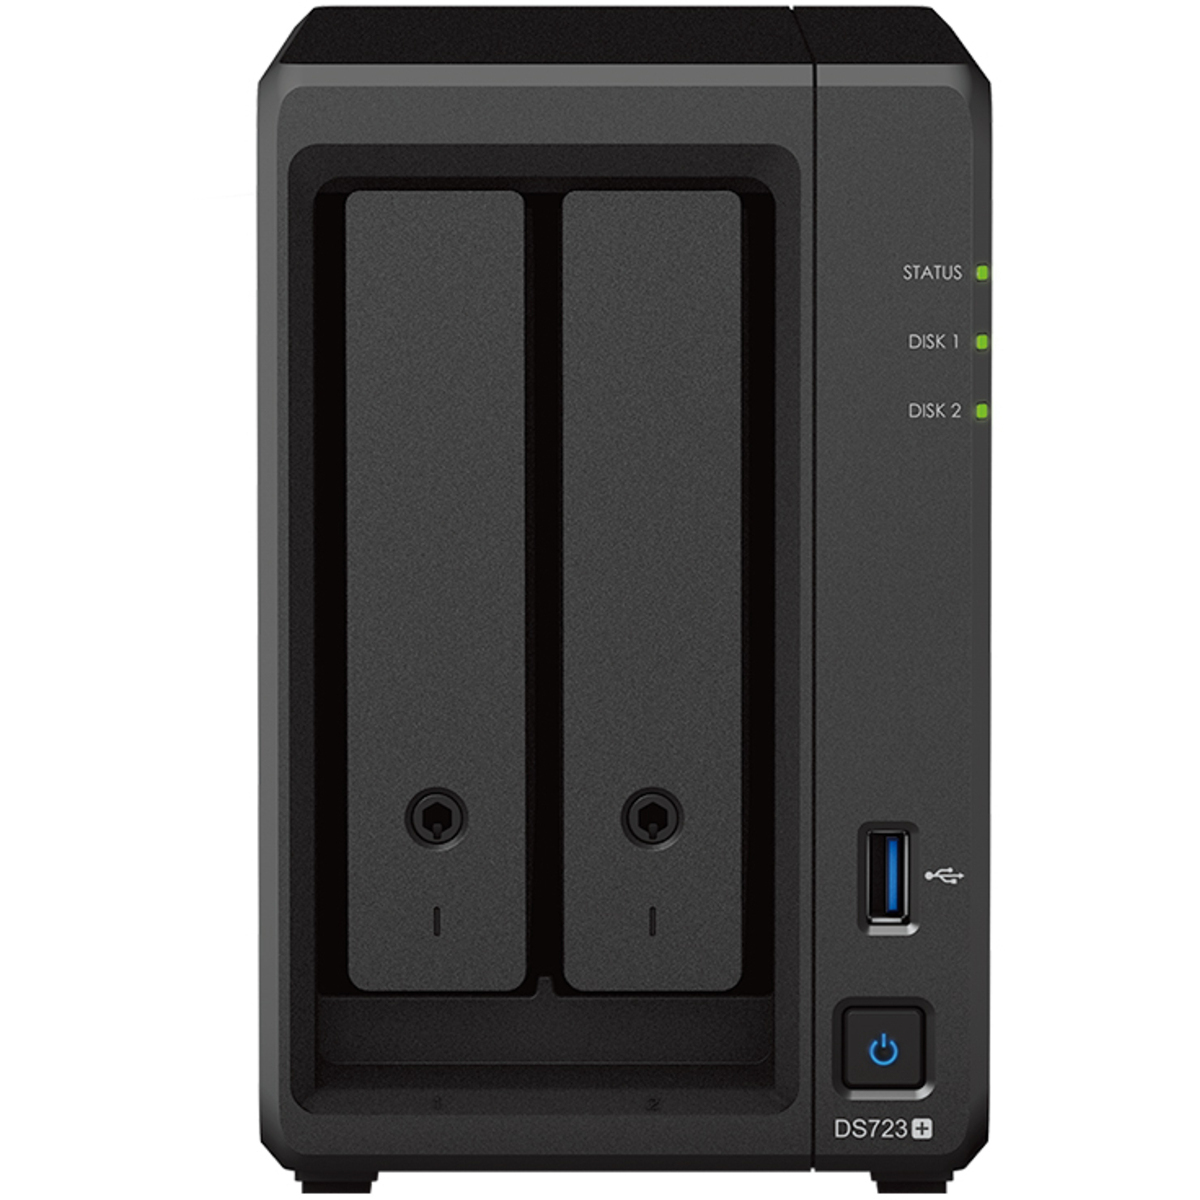 Synology DiskStation DS723+ 24tb 2-Bay Desktop Multimedia / Power User / Business NAS - Network Attached Storage Device 1x24tb Seagate EXOS X24 ST24000NM002H 3.5 7200rpm SATA 6Gb/s HDD ENTERPRISE Class Drives Installed - Burn-In Tested DiskStation DS723+